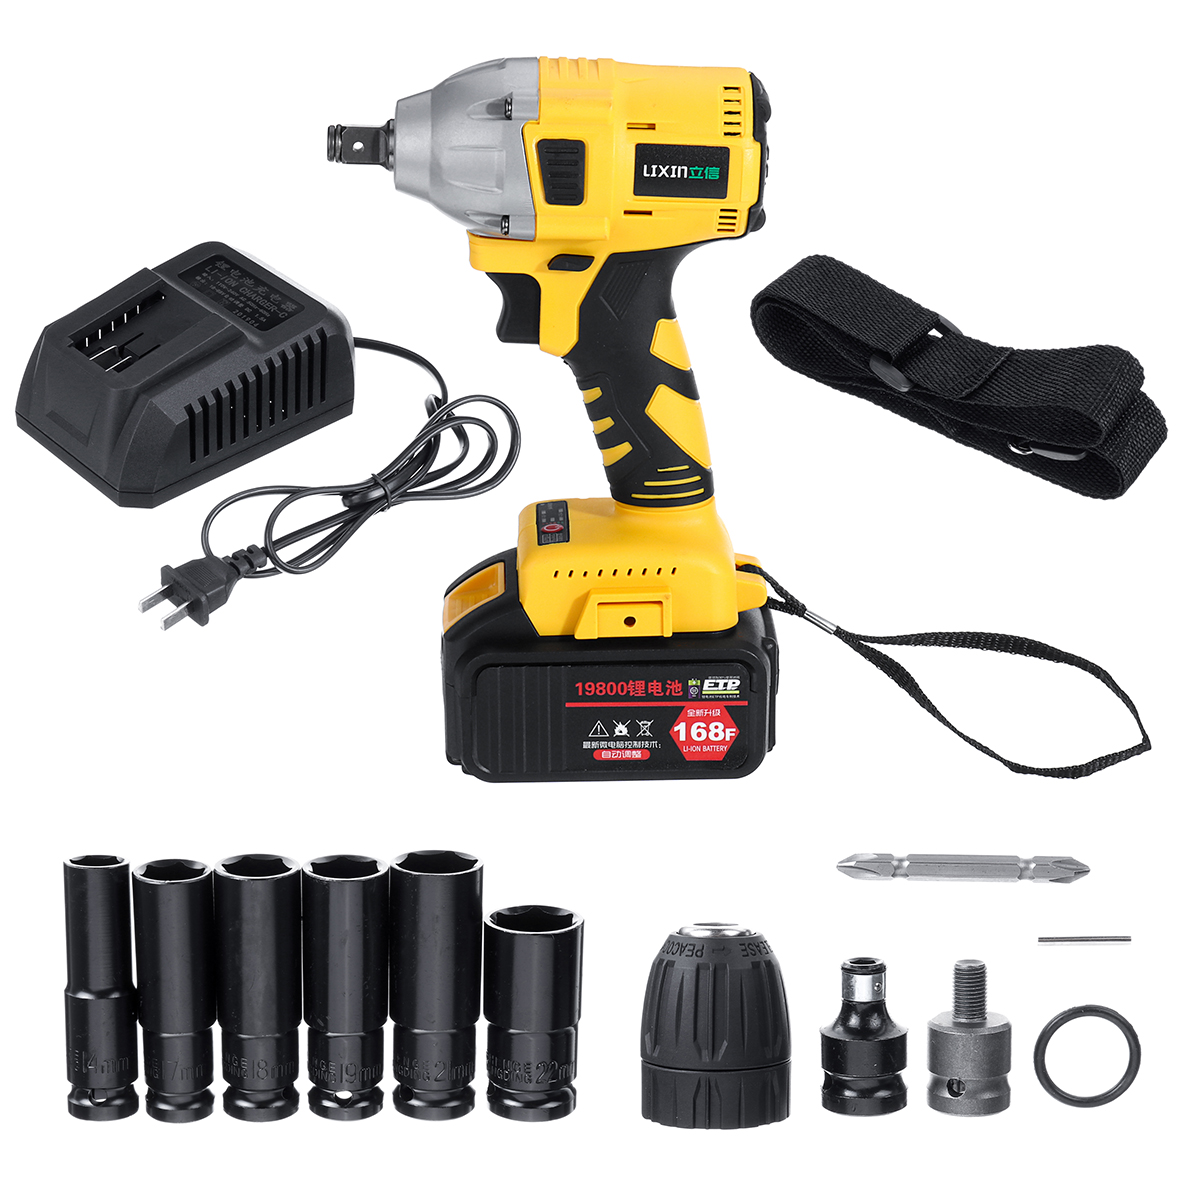 

168F 19800mAh 110V-240V Electric Brushless Impact Wrench LED Lights with Battery